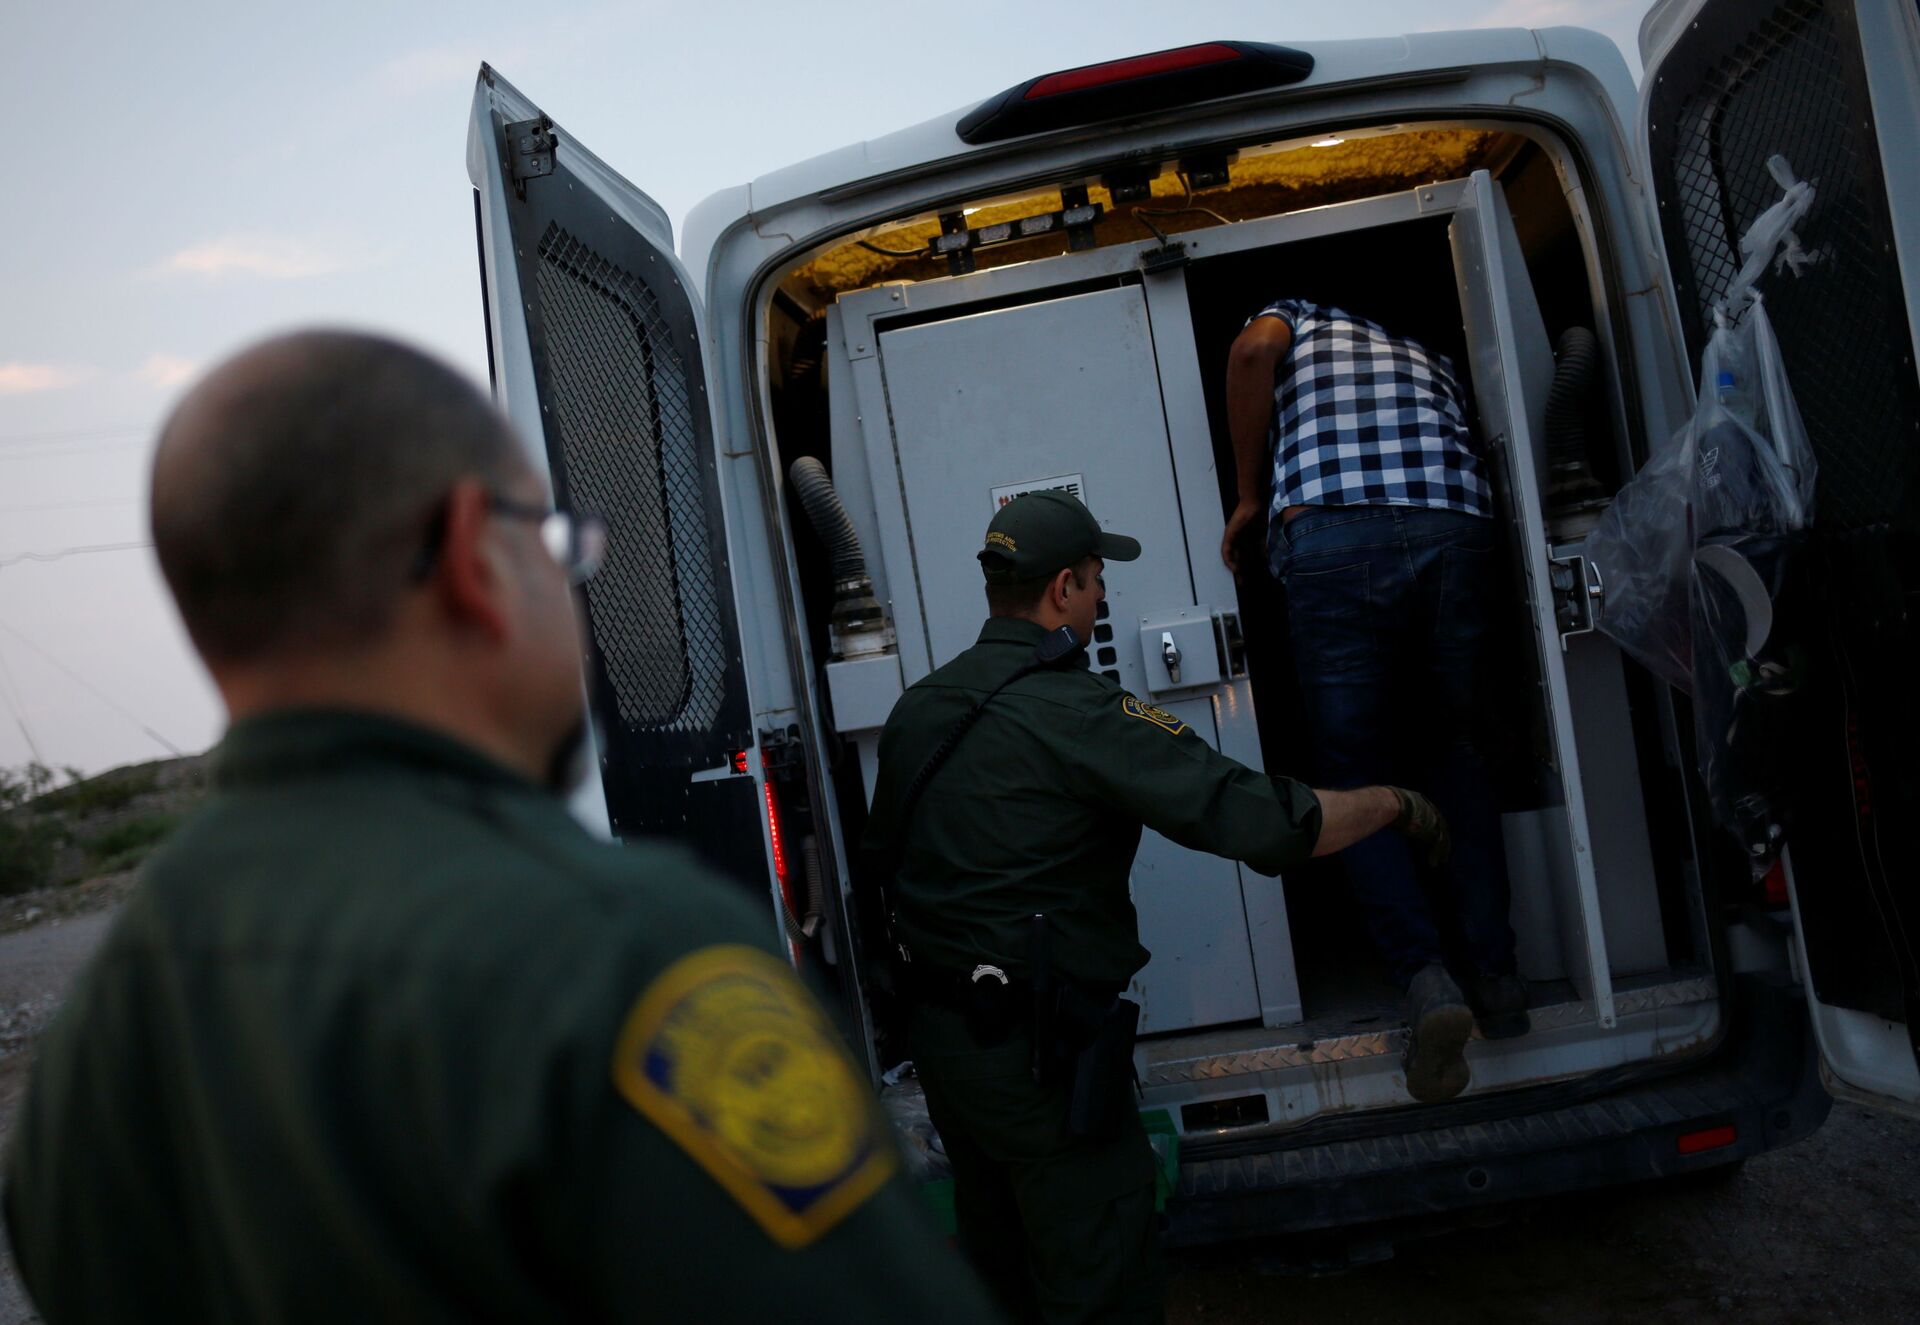 A migrant from Central America is detained by U.S. Border Patrol agents after crossing into the United States from Mexico, in Sunland Park, New Mexico, U.S., July 22, 2021 - Sputnik International, 1920, 07.09.2021